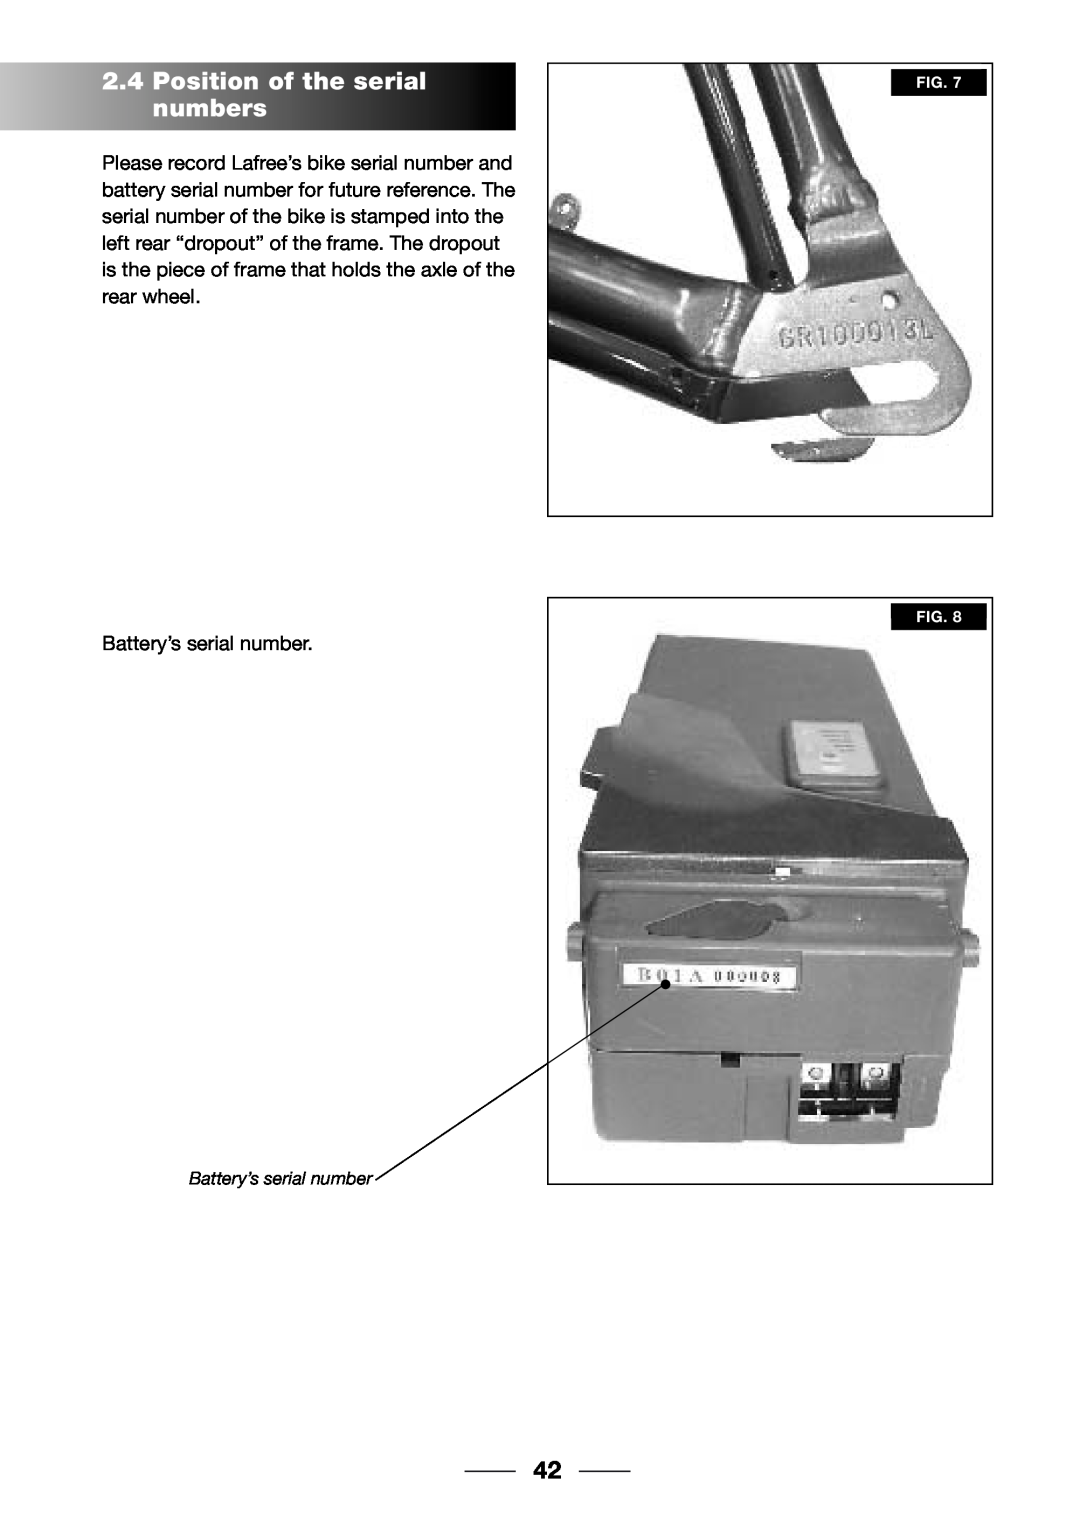 Giant 2002 Motorized Bicycle owner manual Position of the serial numbers, Battery’s serial number 